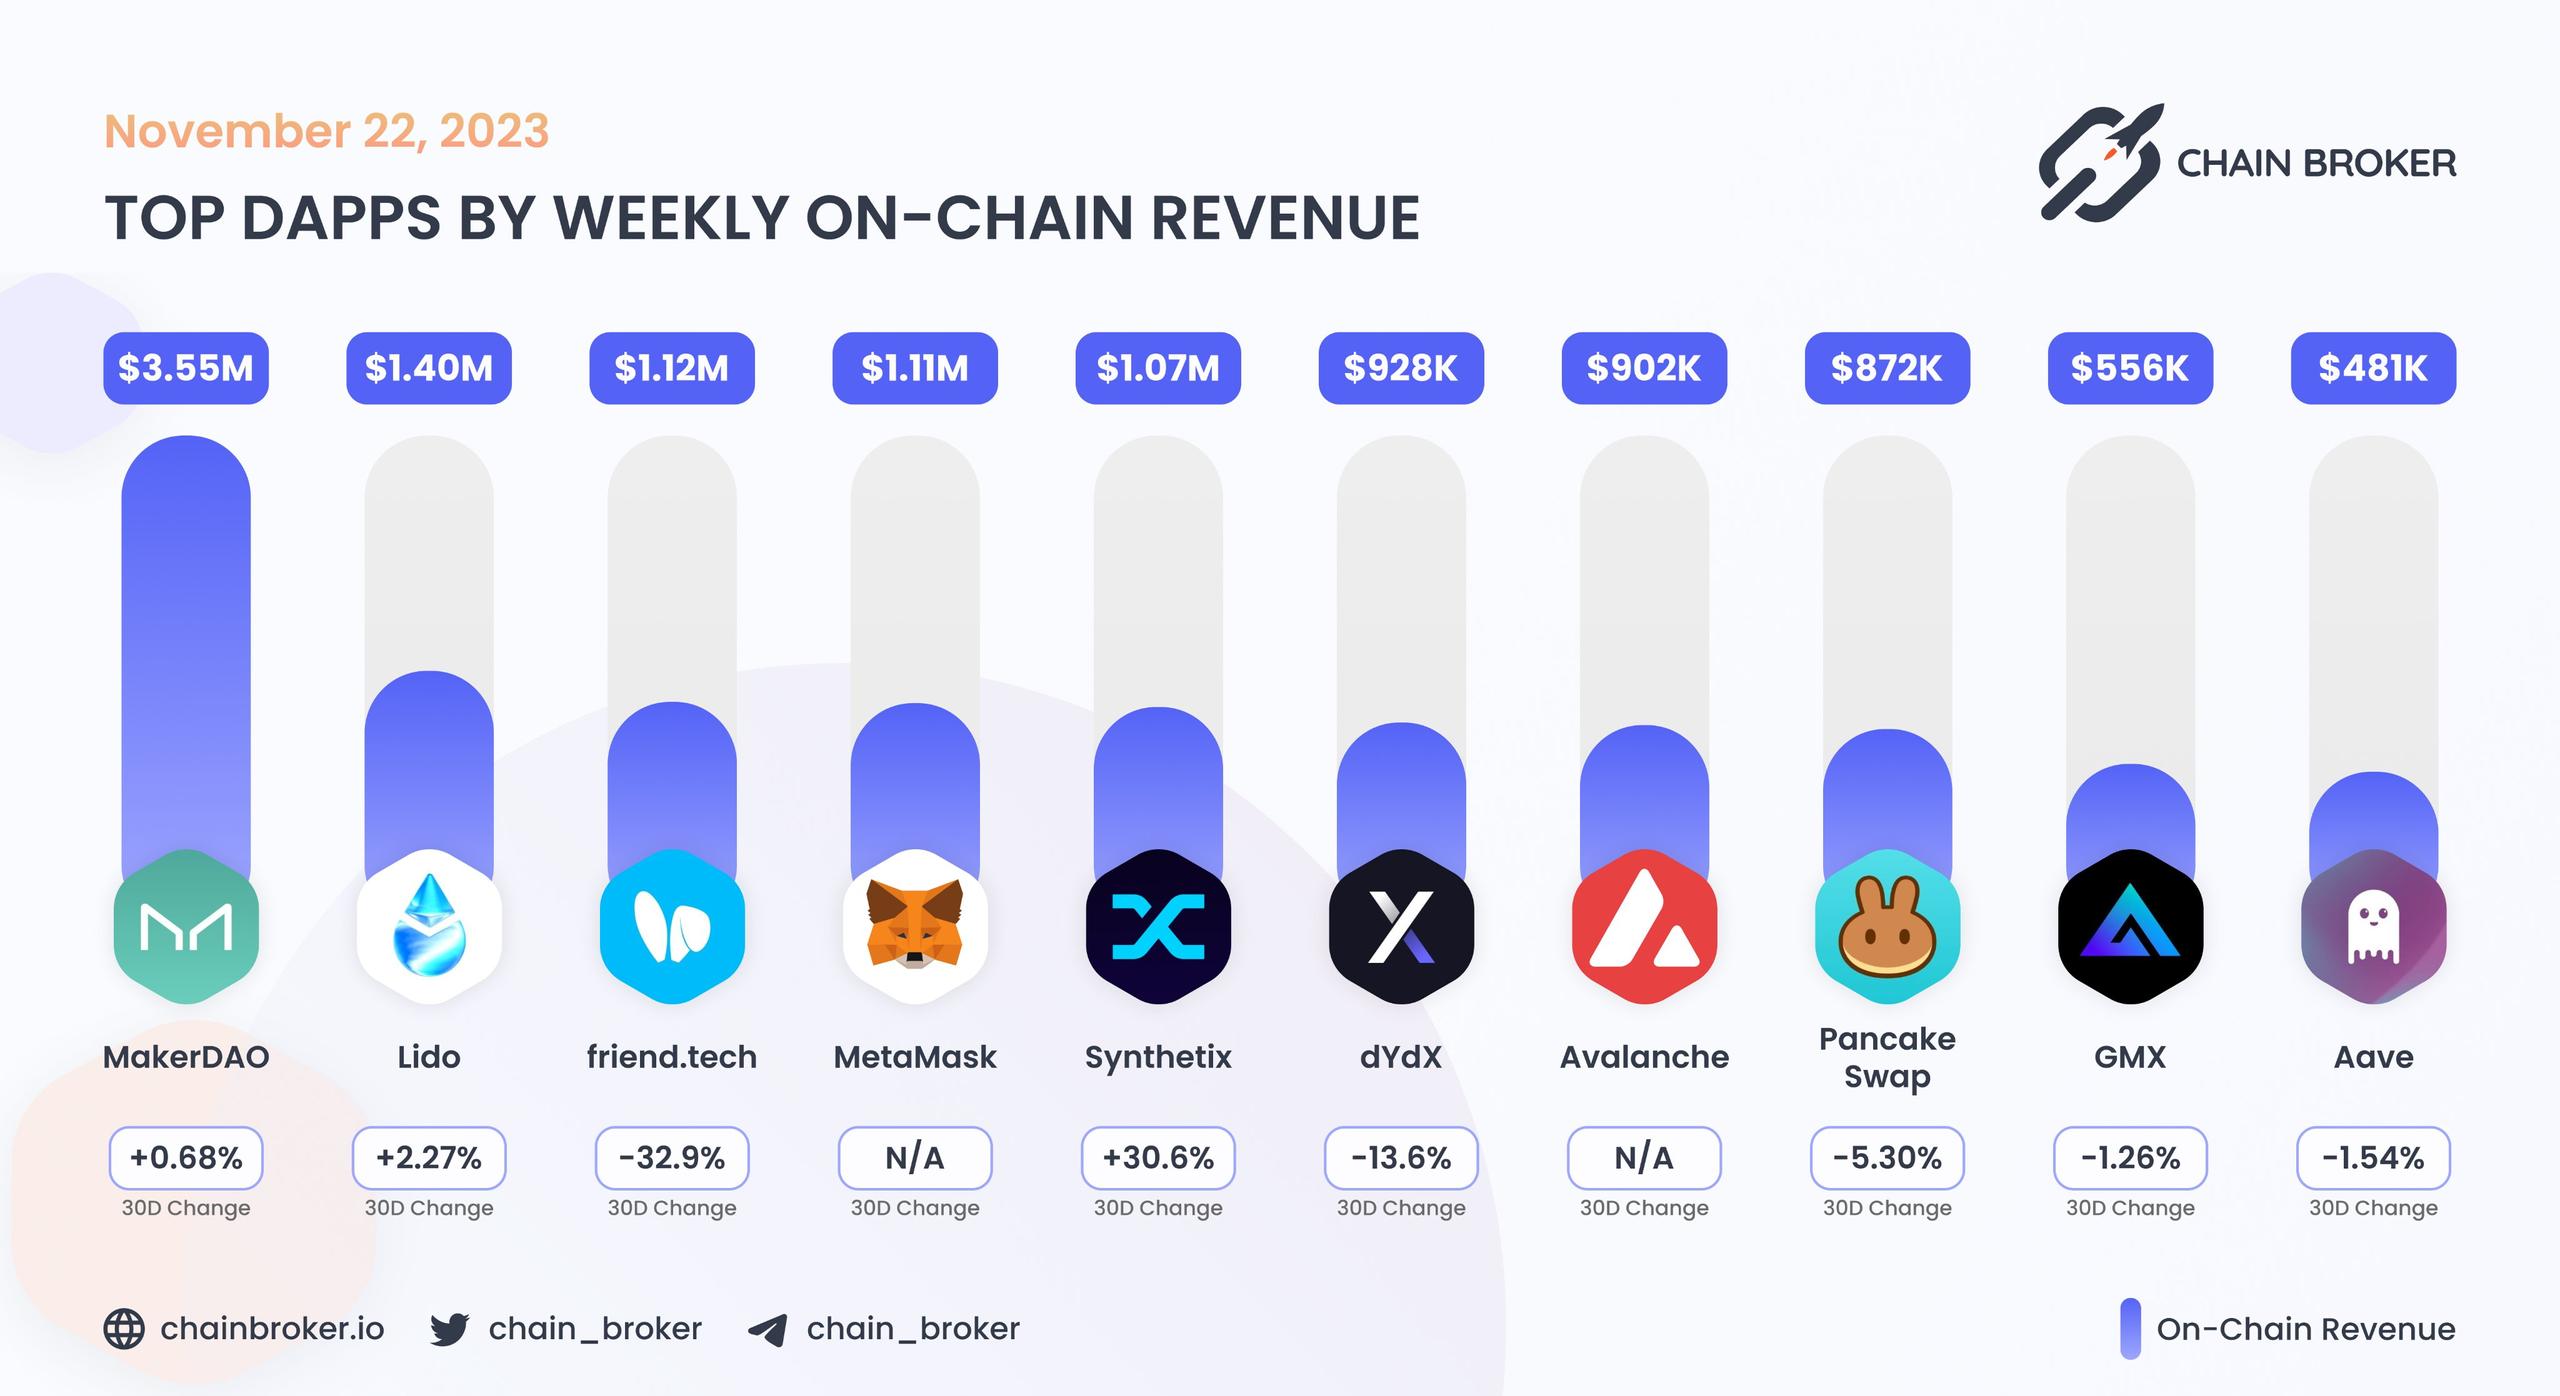 Top dApps by monthly on-chain RevenueTop dApps by monthly on-chain Revenue